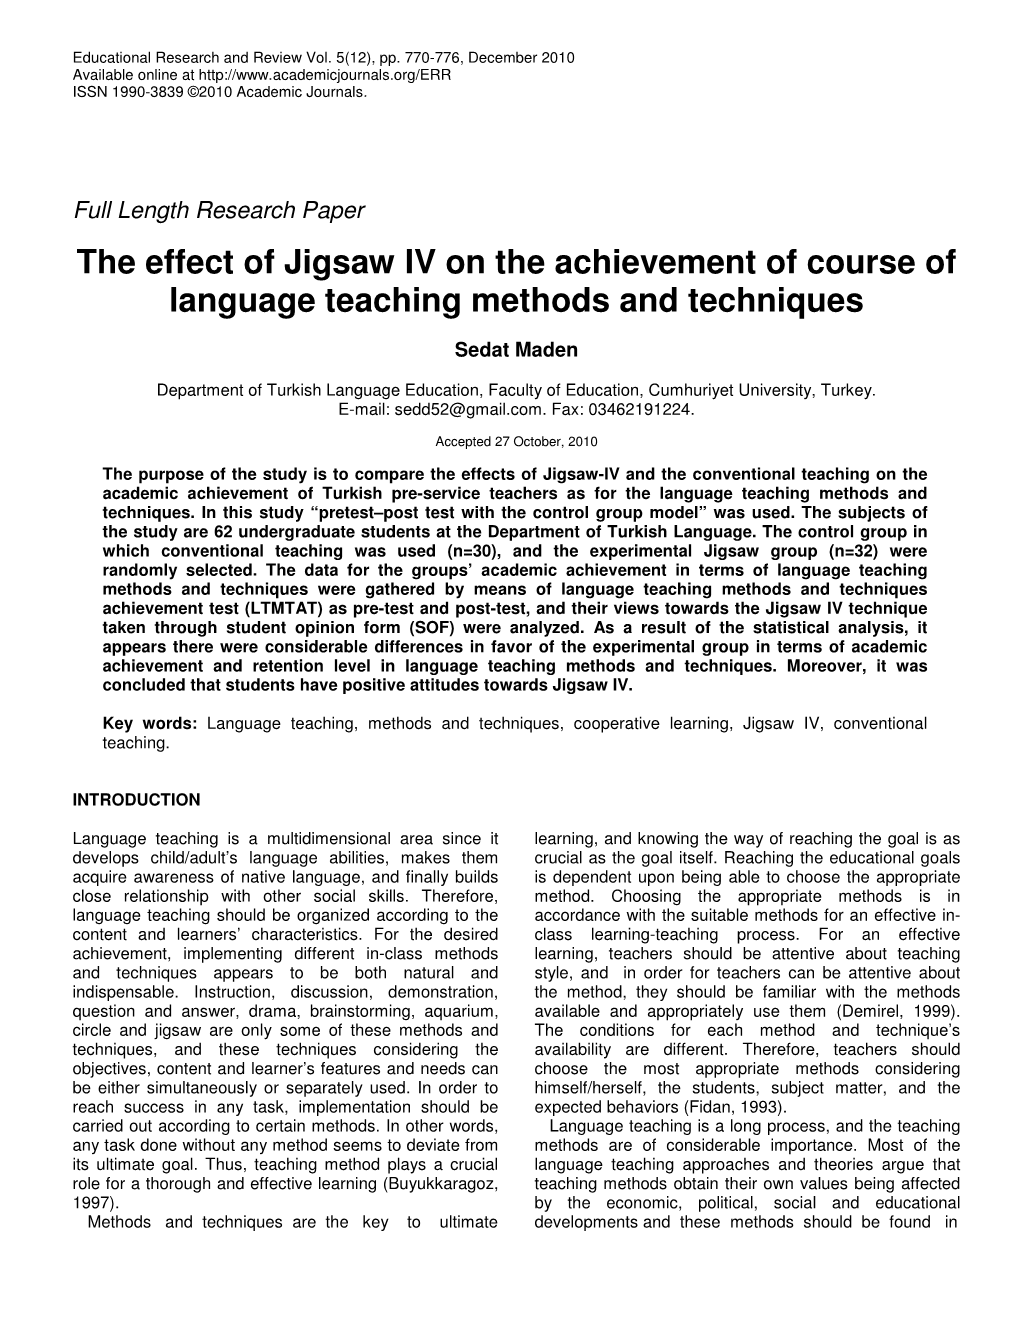 The Effect of Jigsaw IV on the Achievement of Course of Language Teaching Methods and Techniques